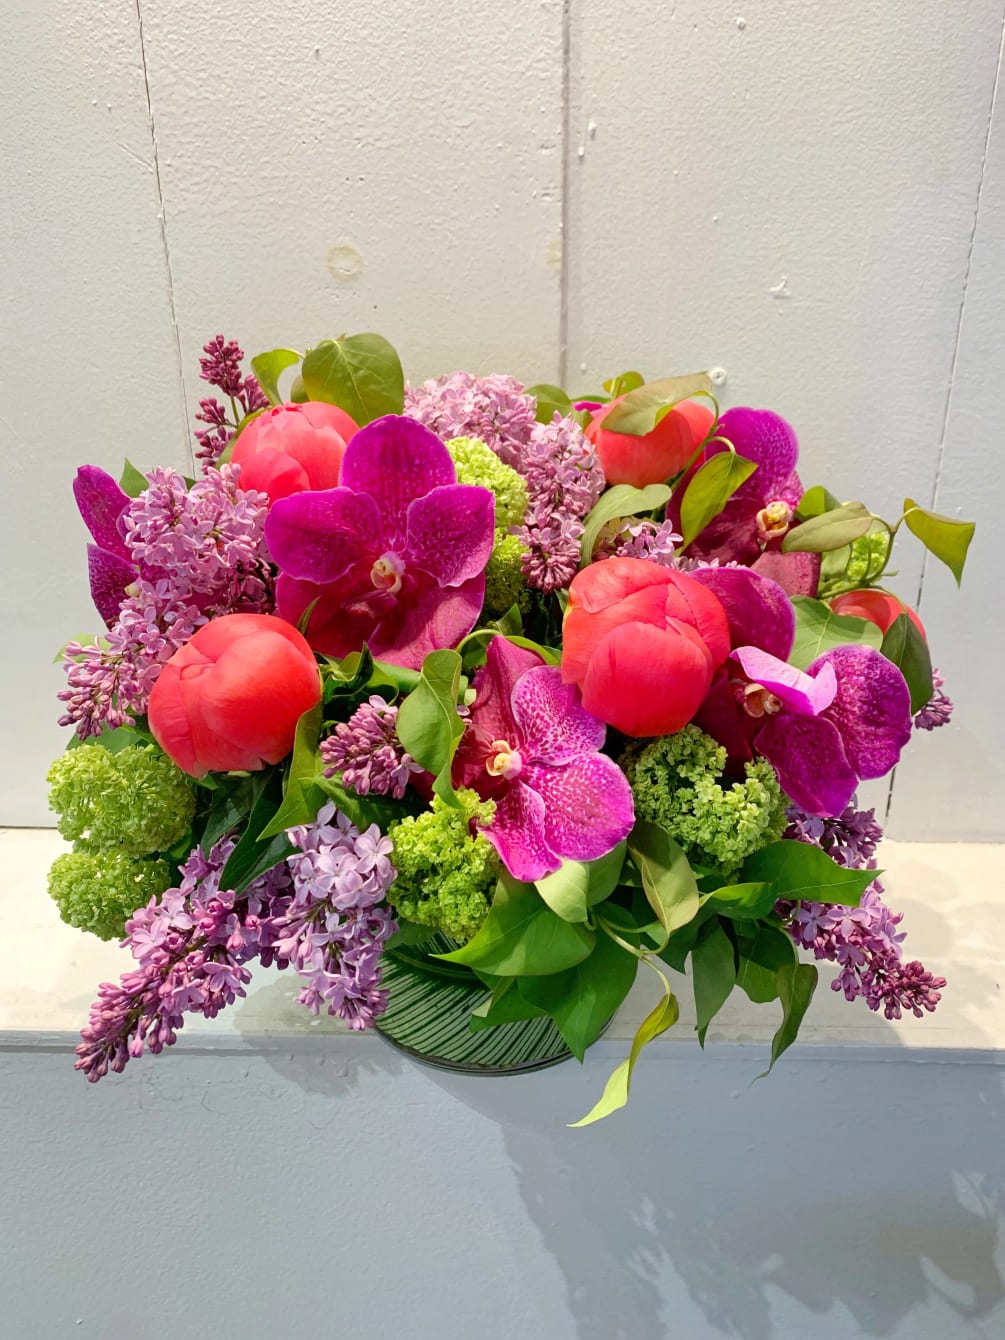 This beautiful arrangement is a combination of beautiful flowers that you will